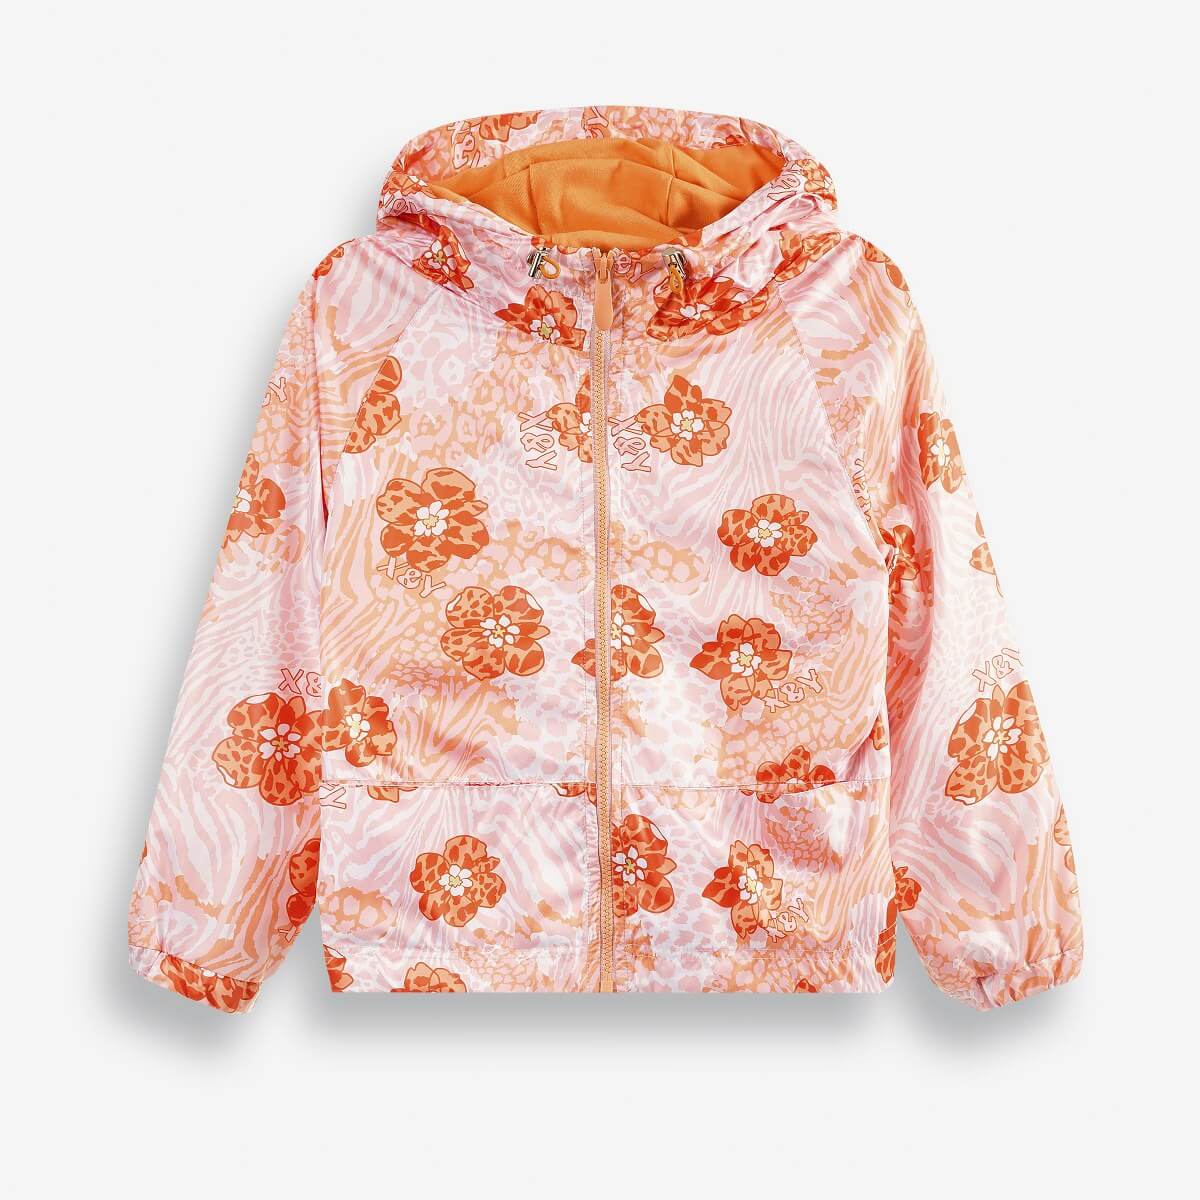 Floral Girls' Hooded Jacket with a Zip-Up Closure